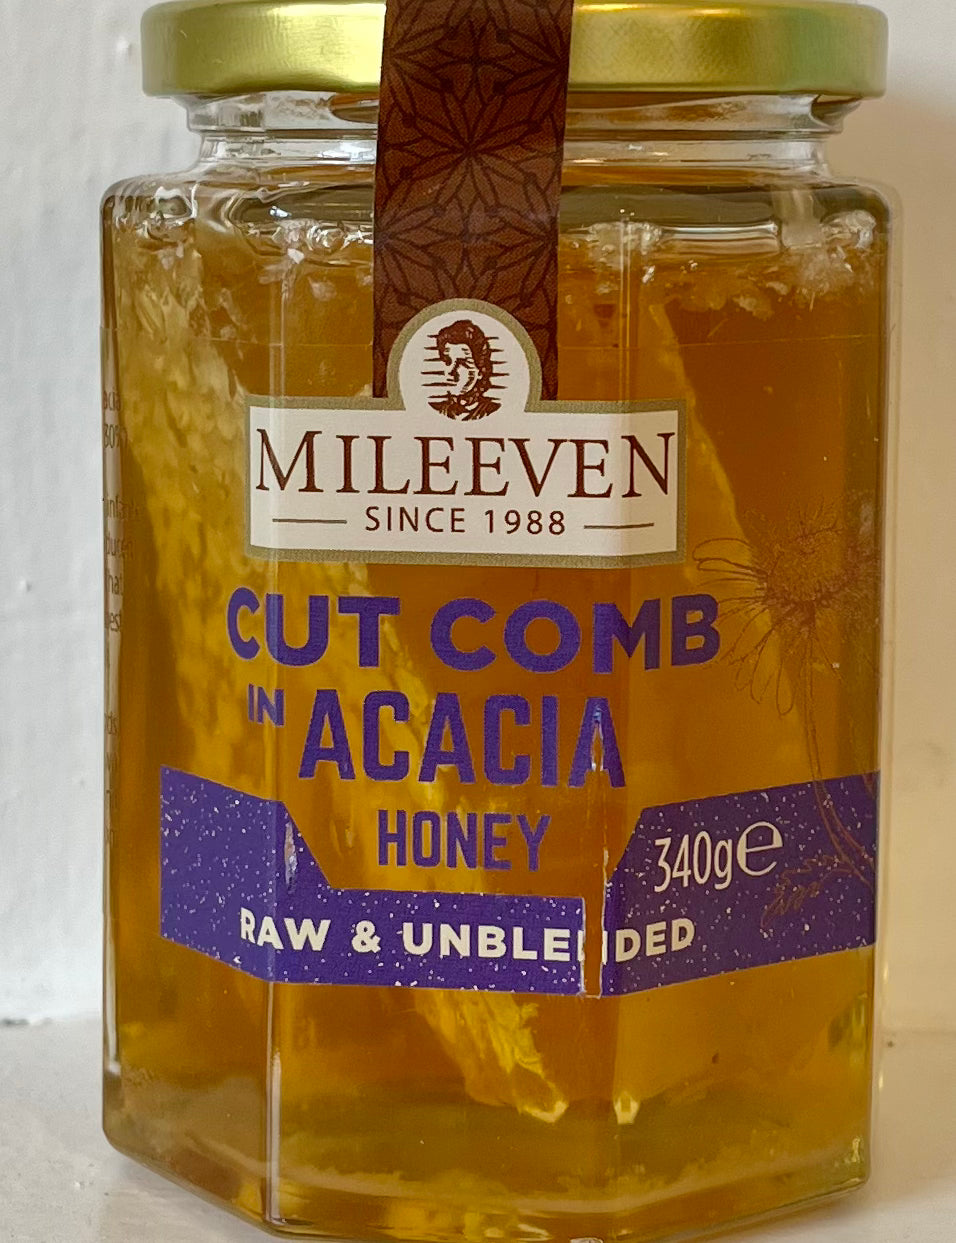 Mileeven Acacia Honey with  Cut Comb  - 340g